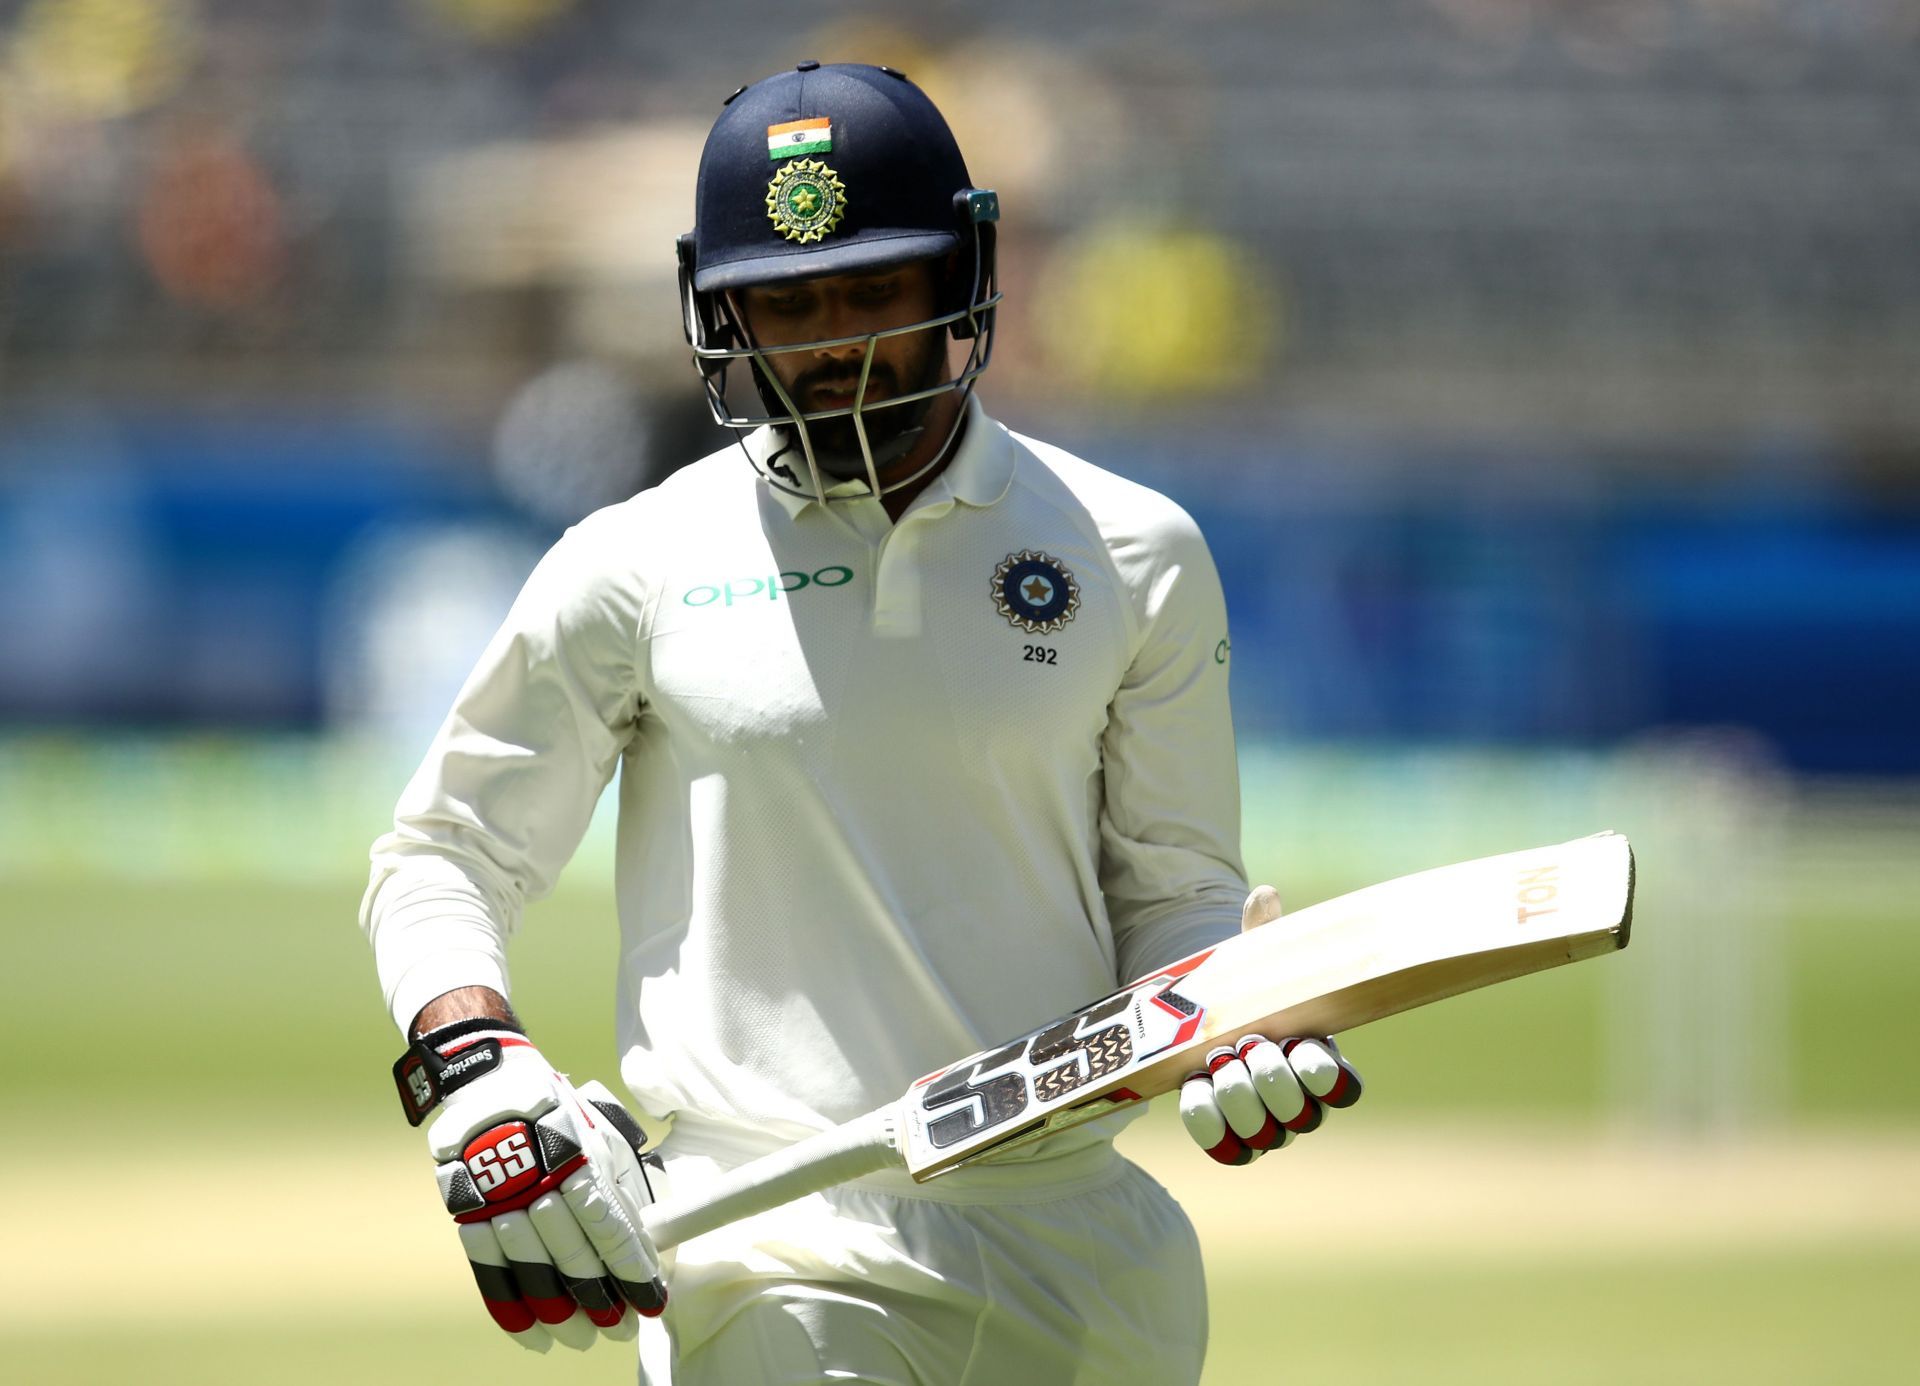 Hanuma Vihari could be a wildcard pick to replace Rohit Sharma in the playing XI